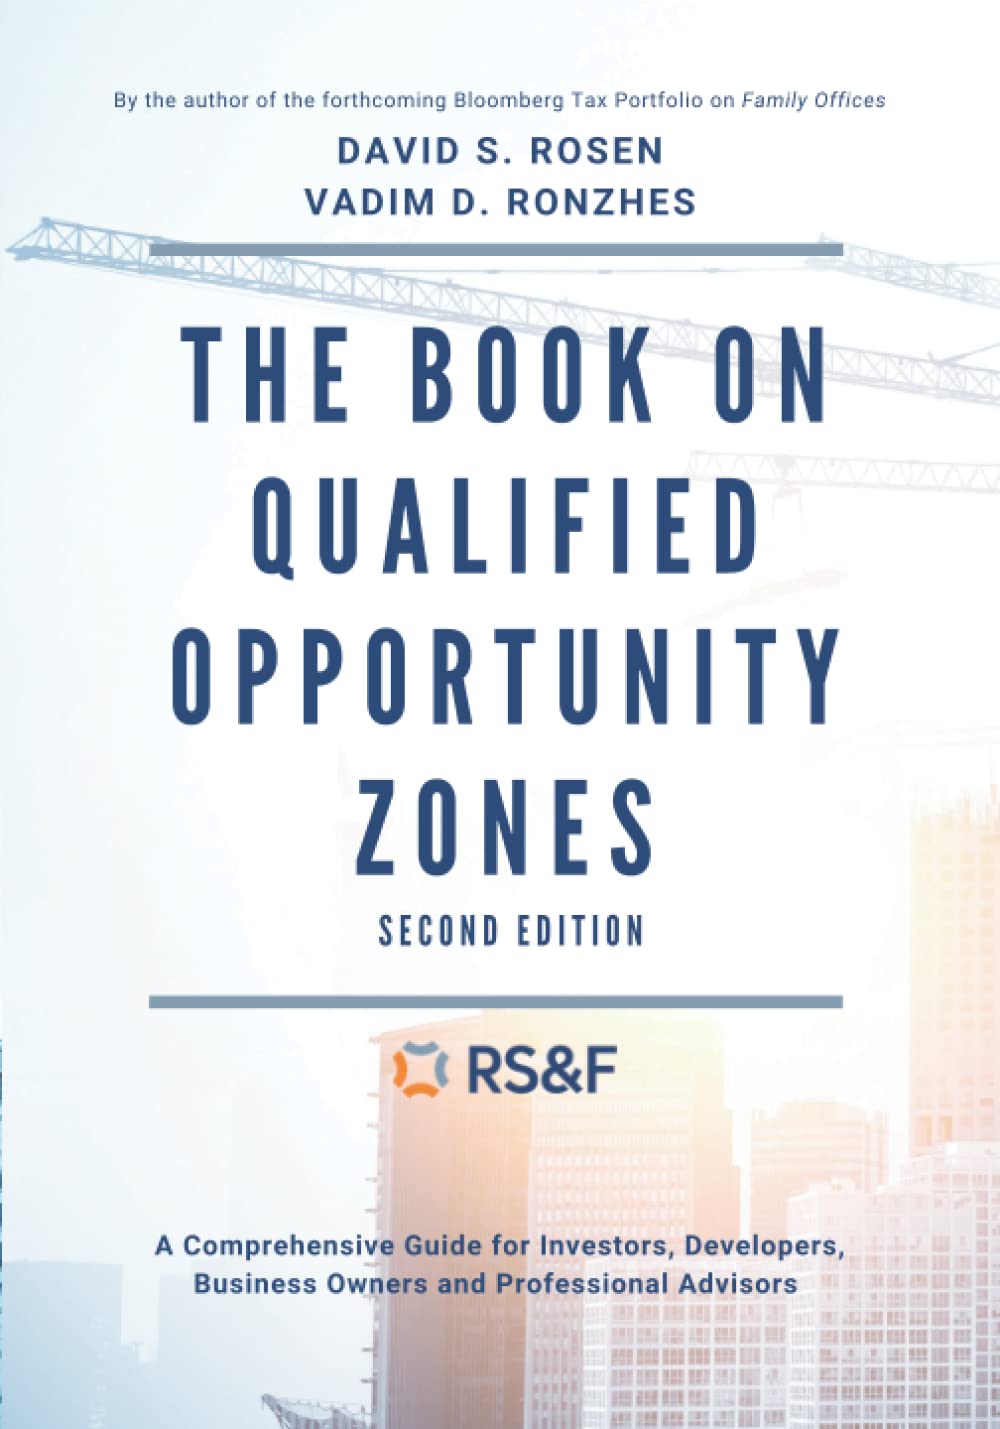 Book on Qualified Opportunity Zones: A Comprehensive Guide for Investors, Developers, Business Owners and Professional Advisors